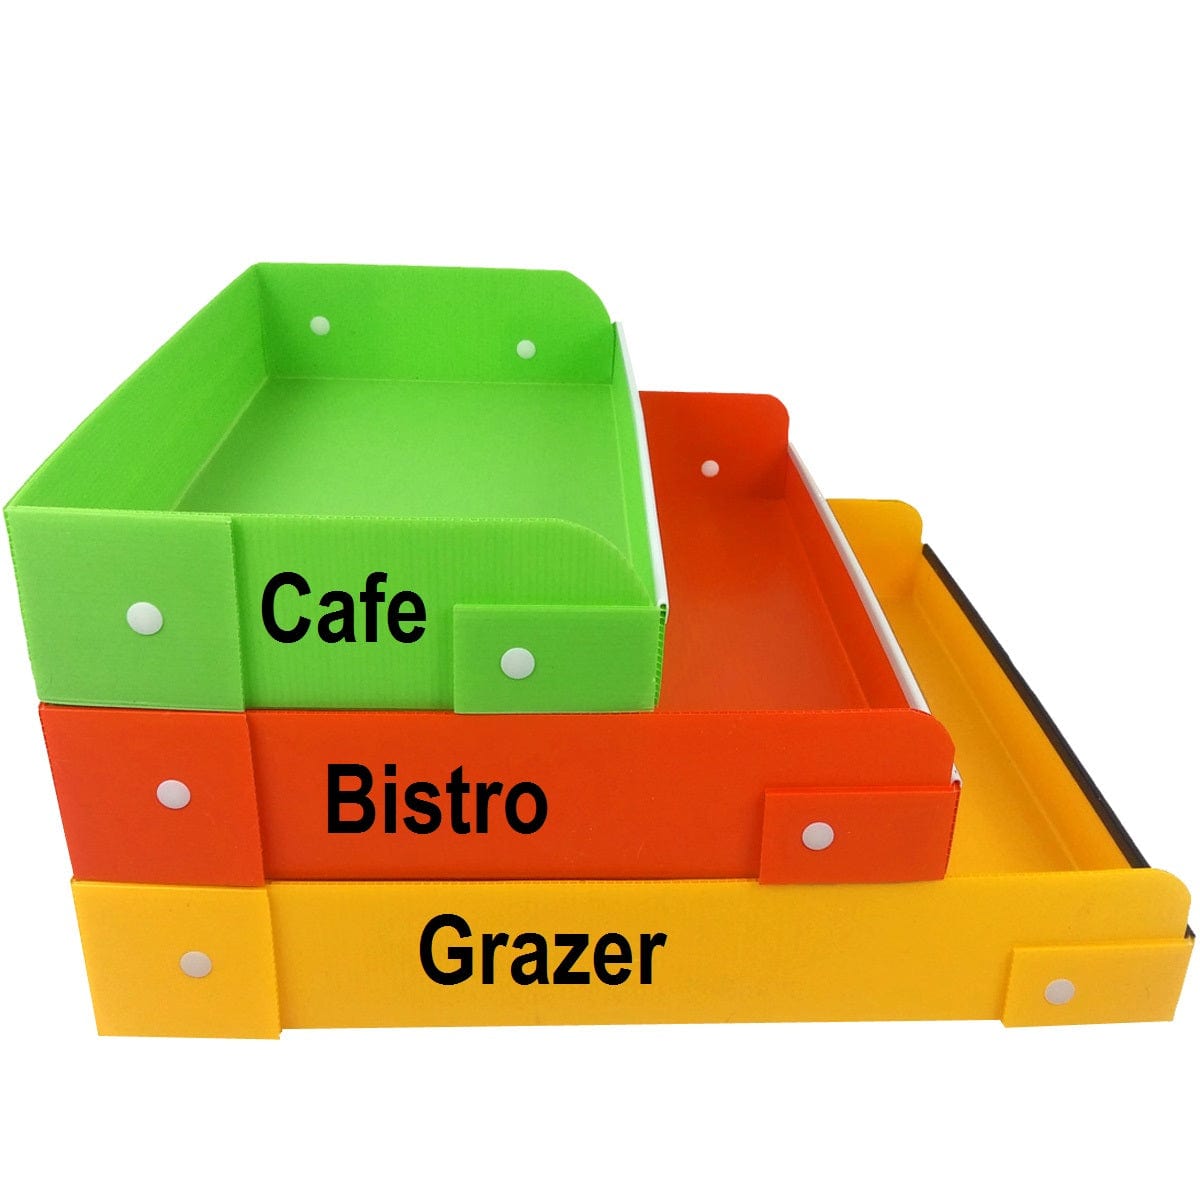 Physical representation of the size difference between the café, bistro, and grazer